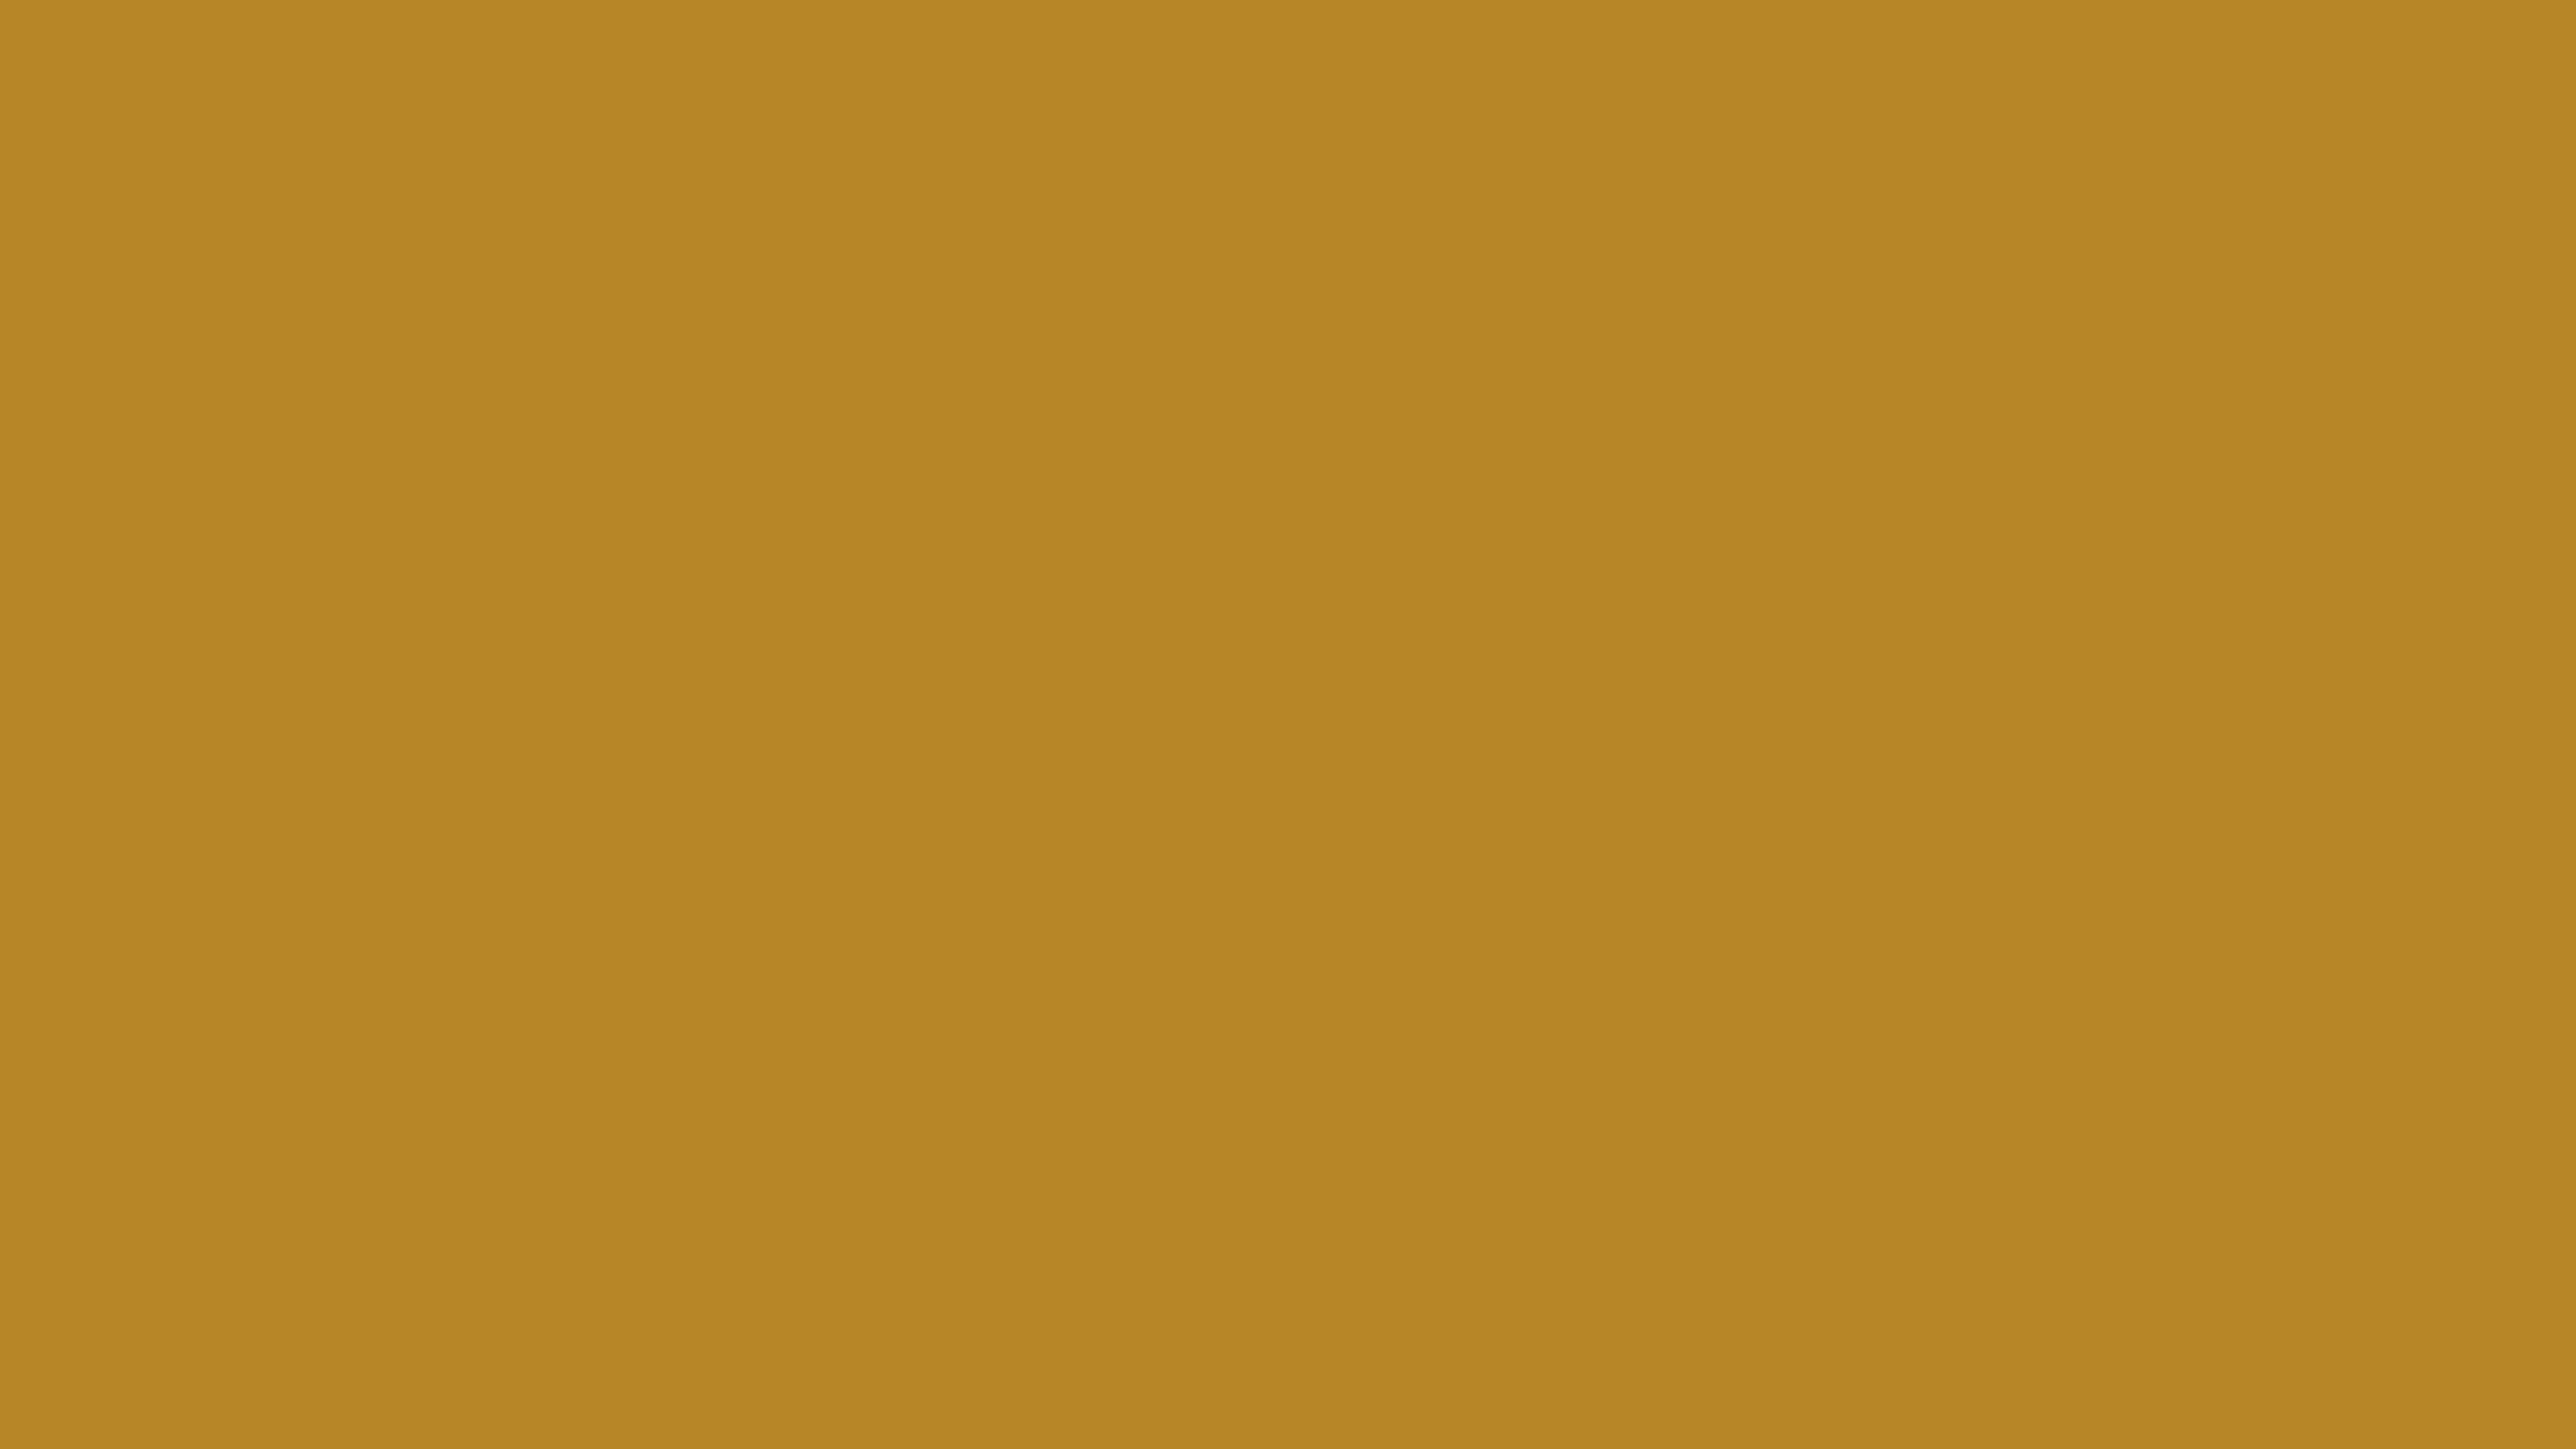 University Of California Gold Solid Color Background Wallpaper